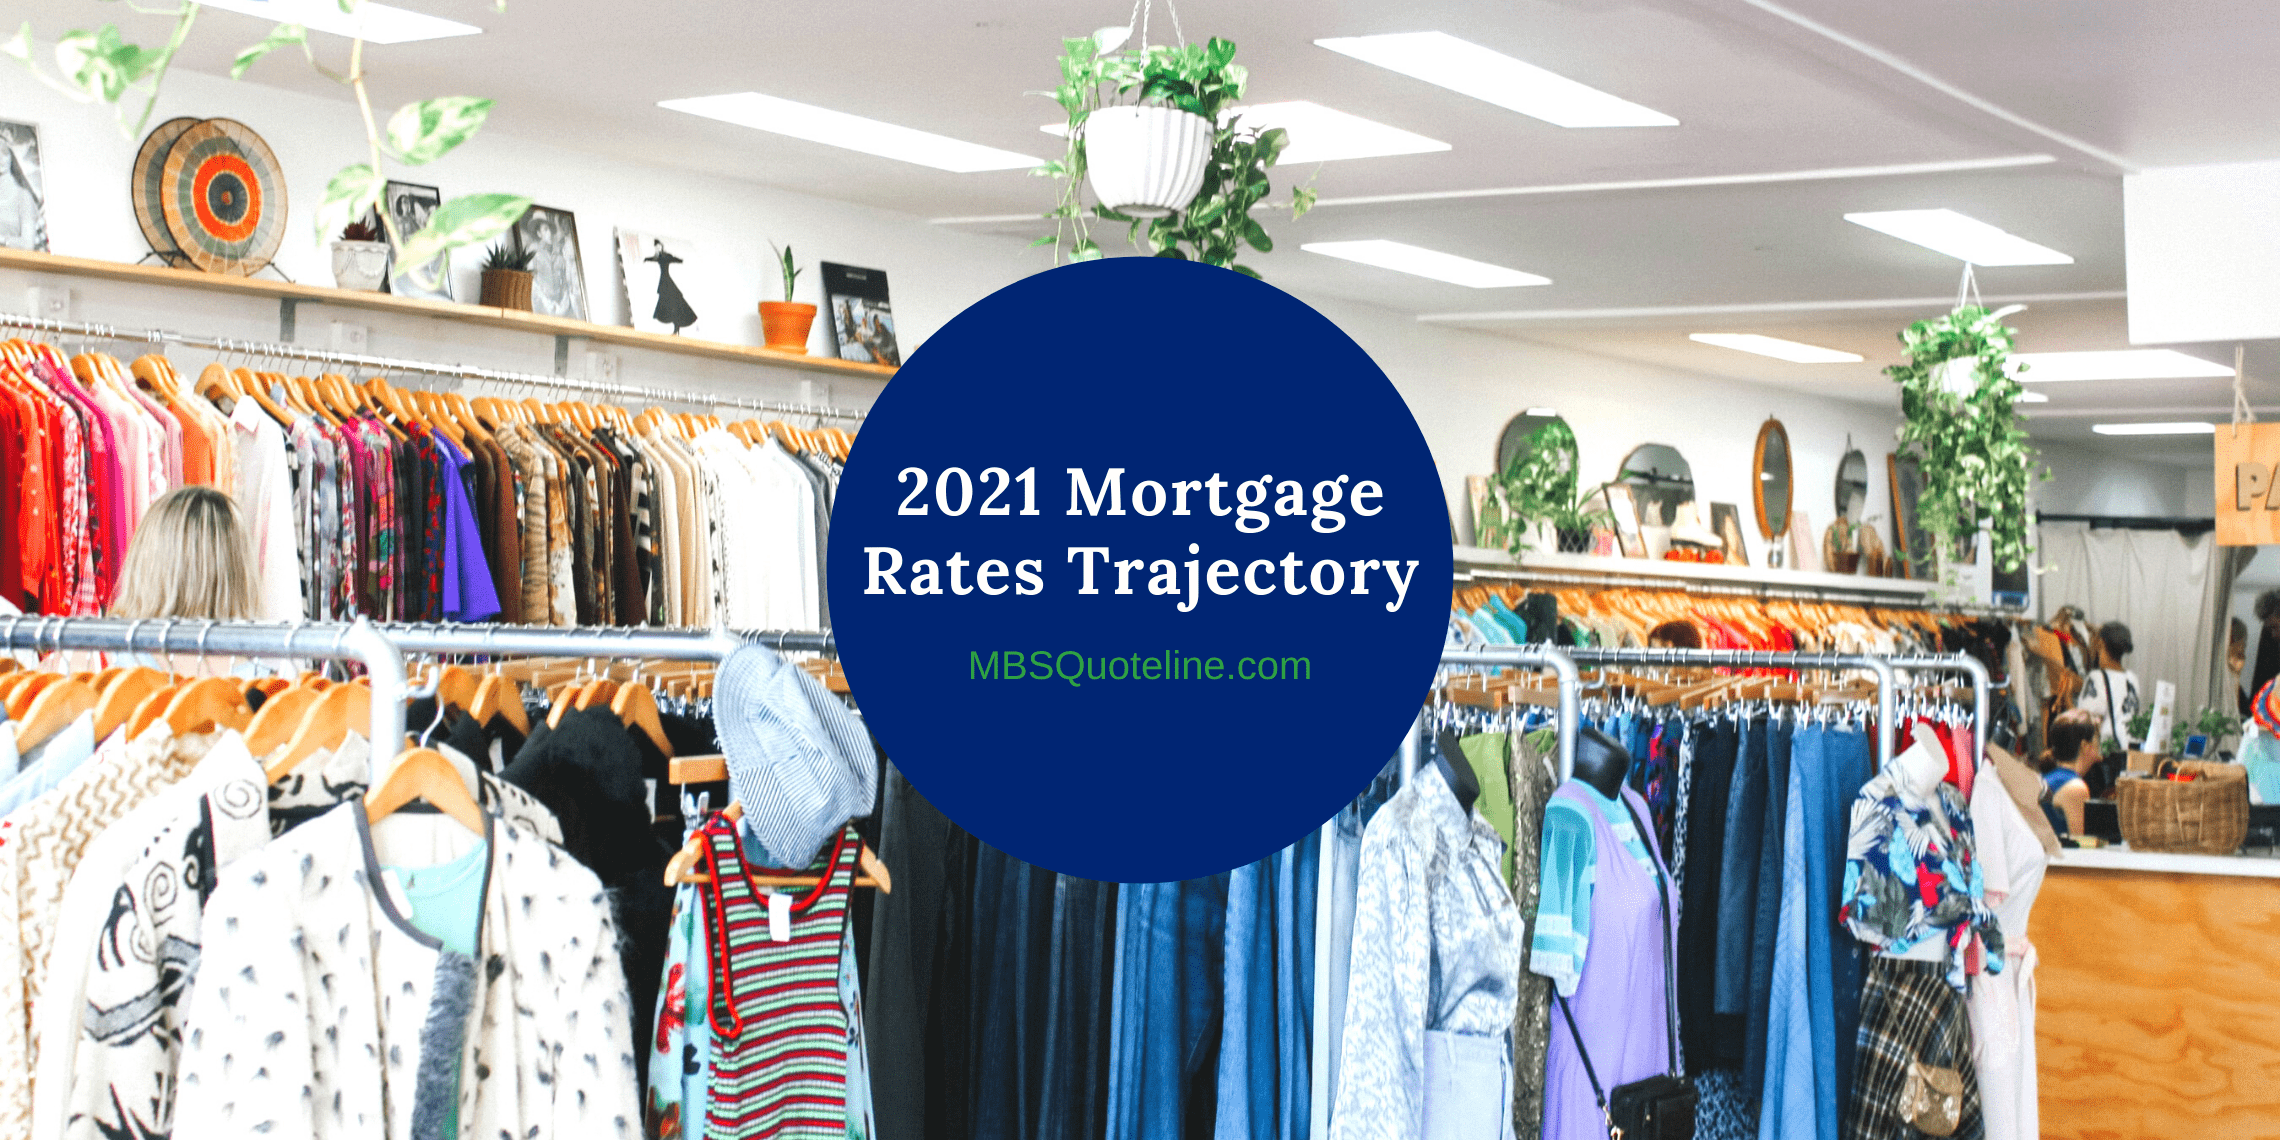 2021 mortgage rates trajectory rising inflation mbsquoteline mortgagetime featured